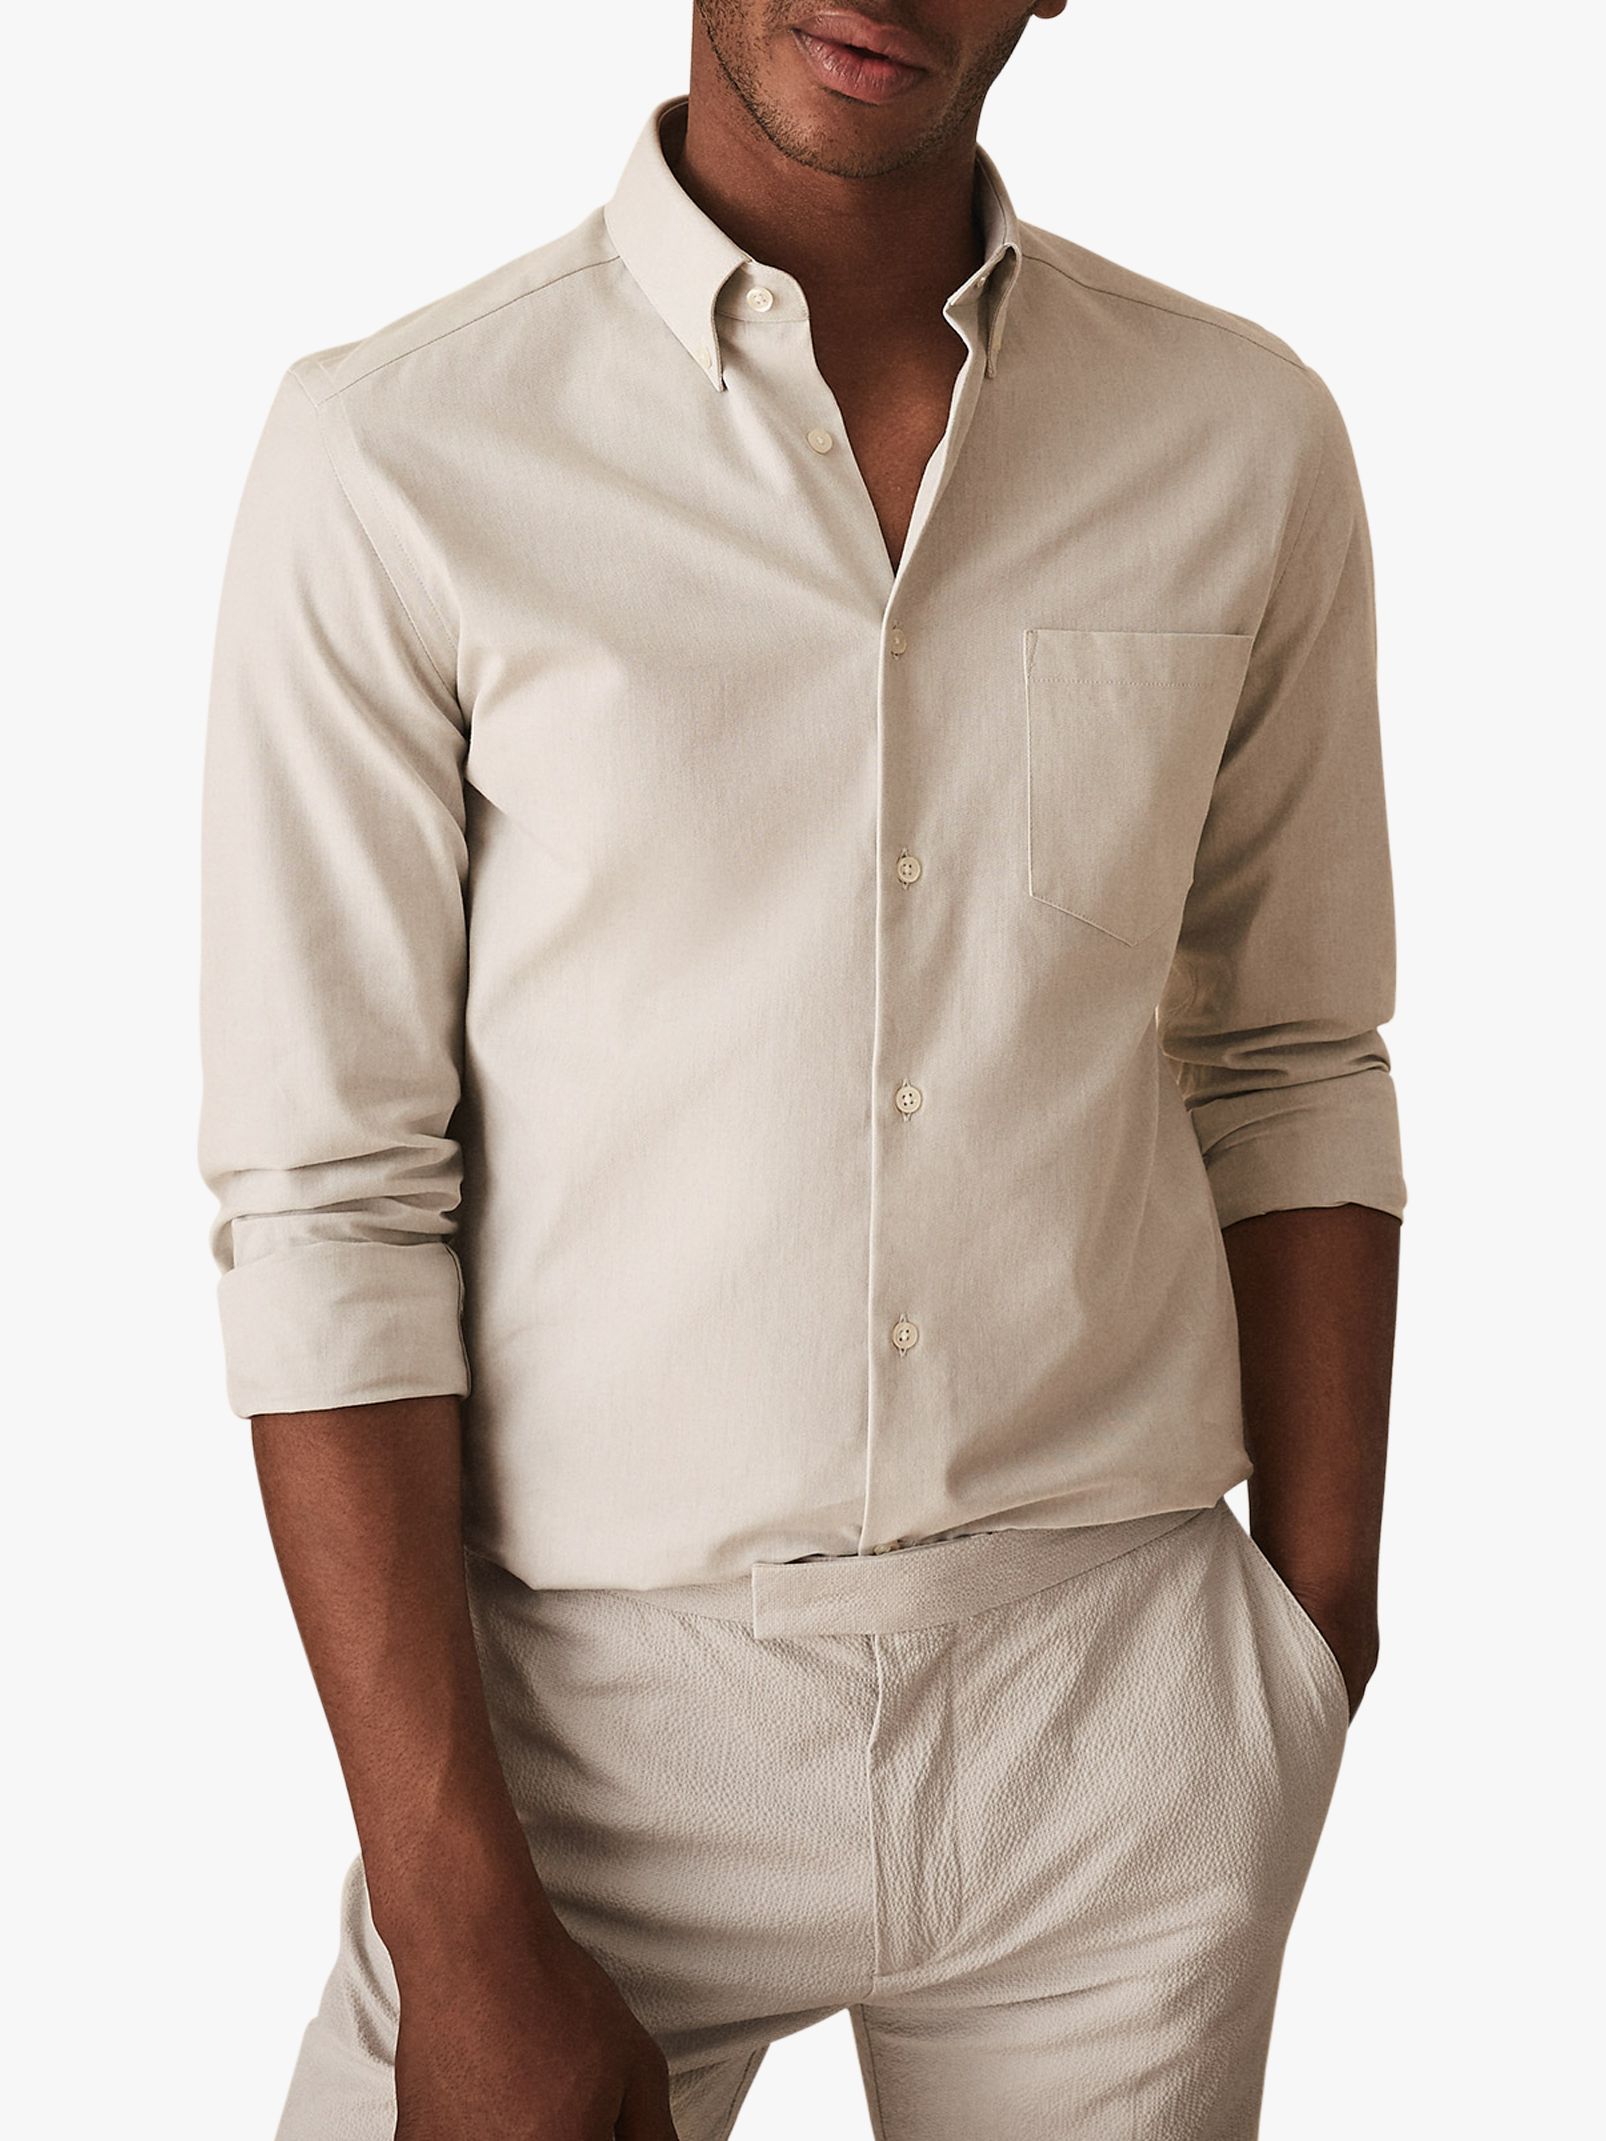 Reiss Ainslee Brushed Cotton Oxford Slim Fit Shirt, Camel, L